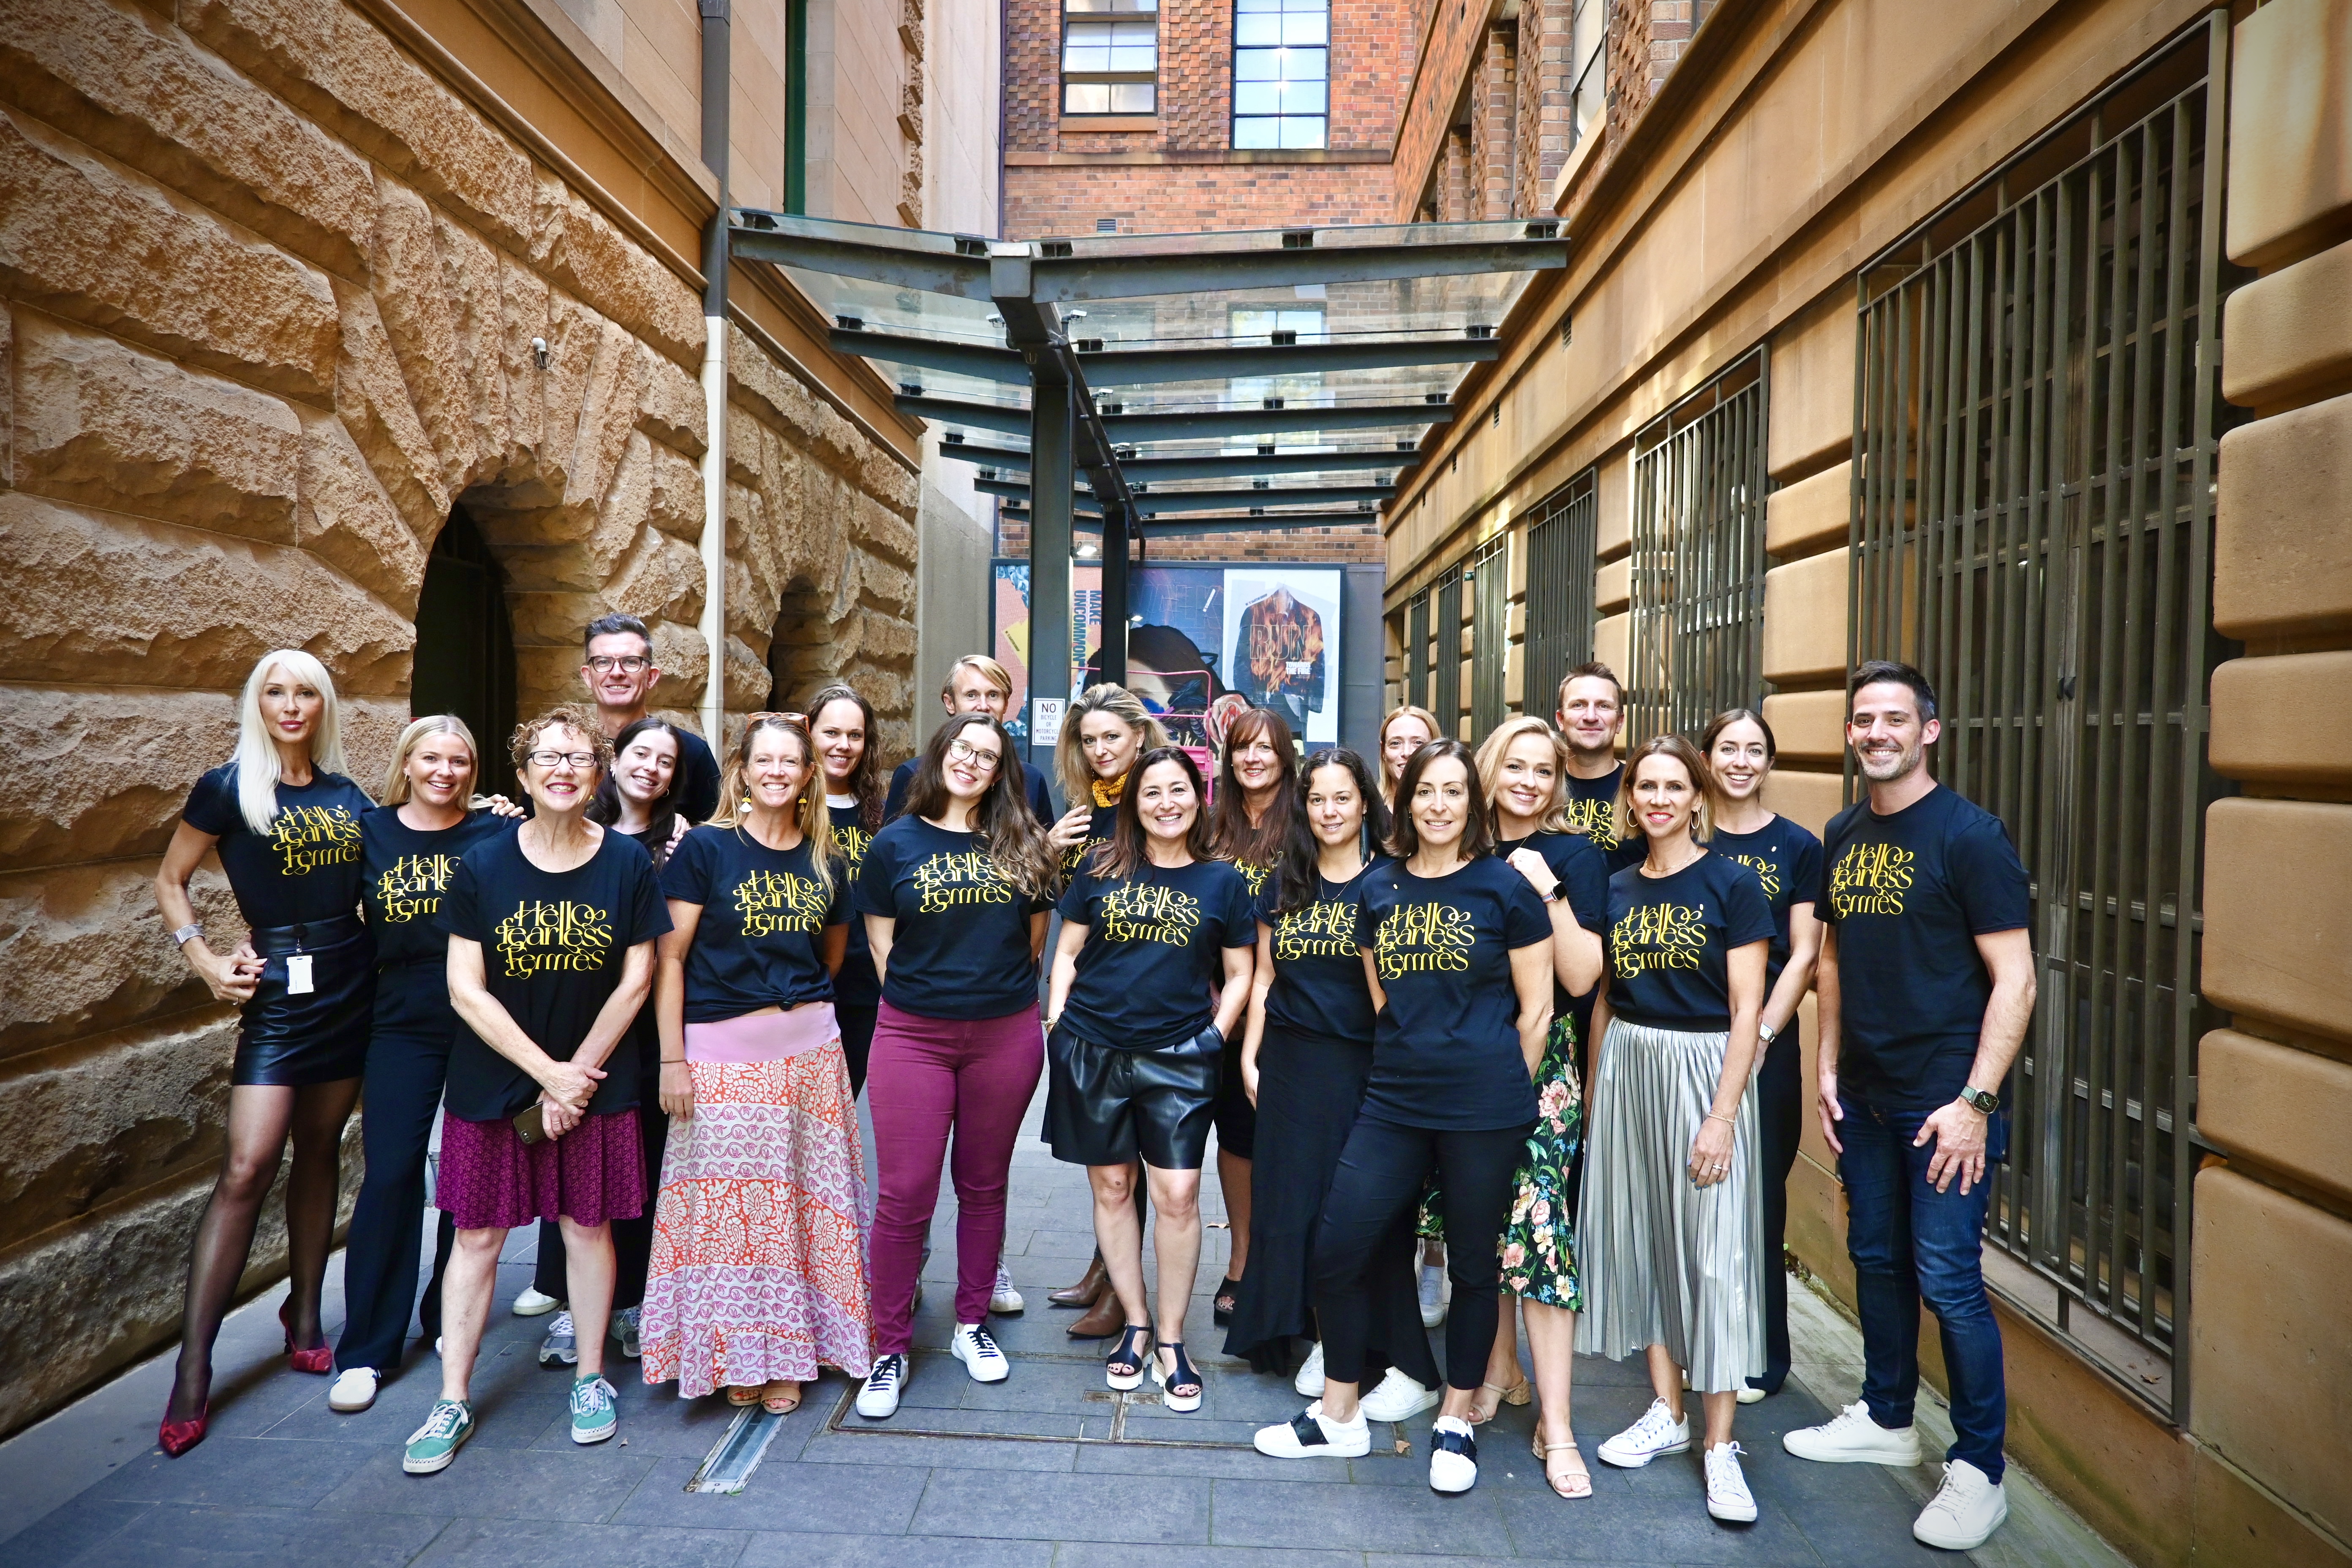 M&C Saatchi Group's Employee Led Network for Women (FEMM&C) launches 'Hello Fearless Femmes'